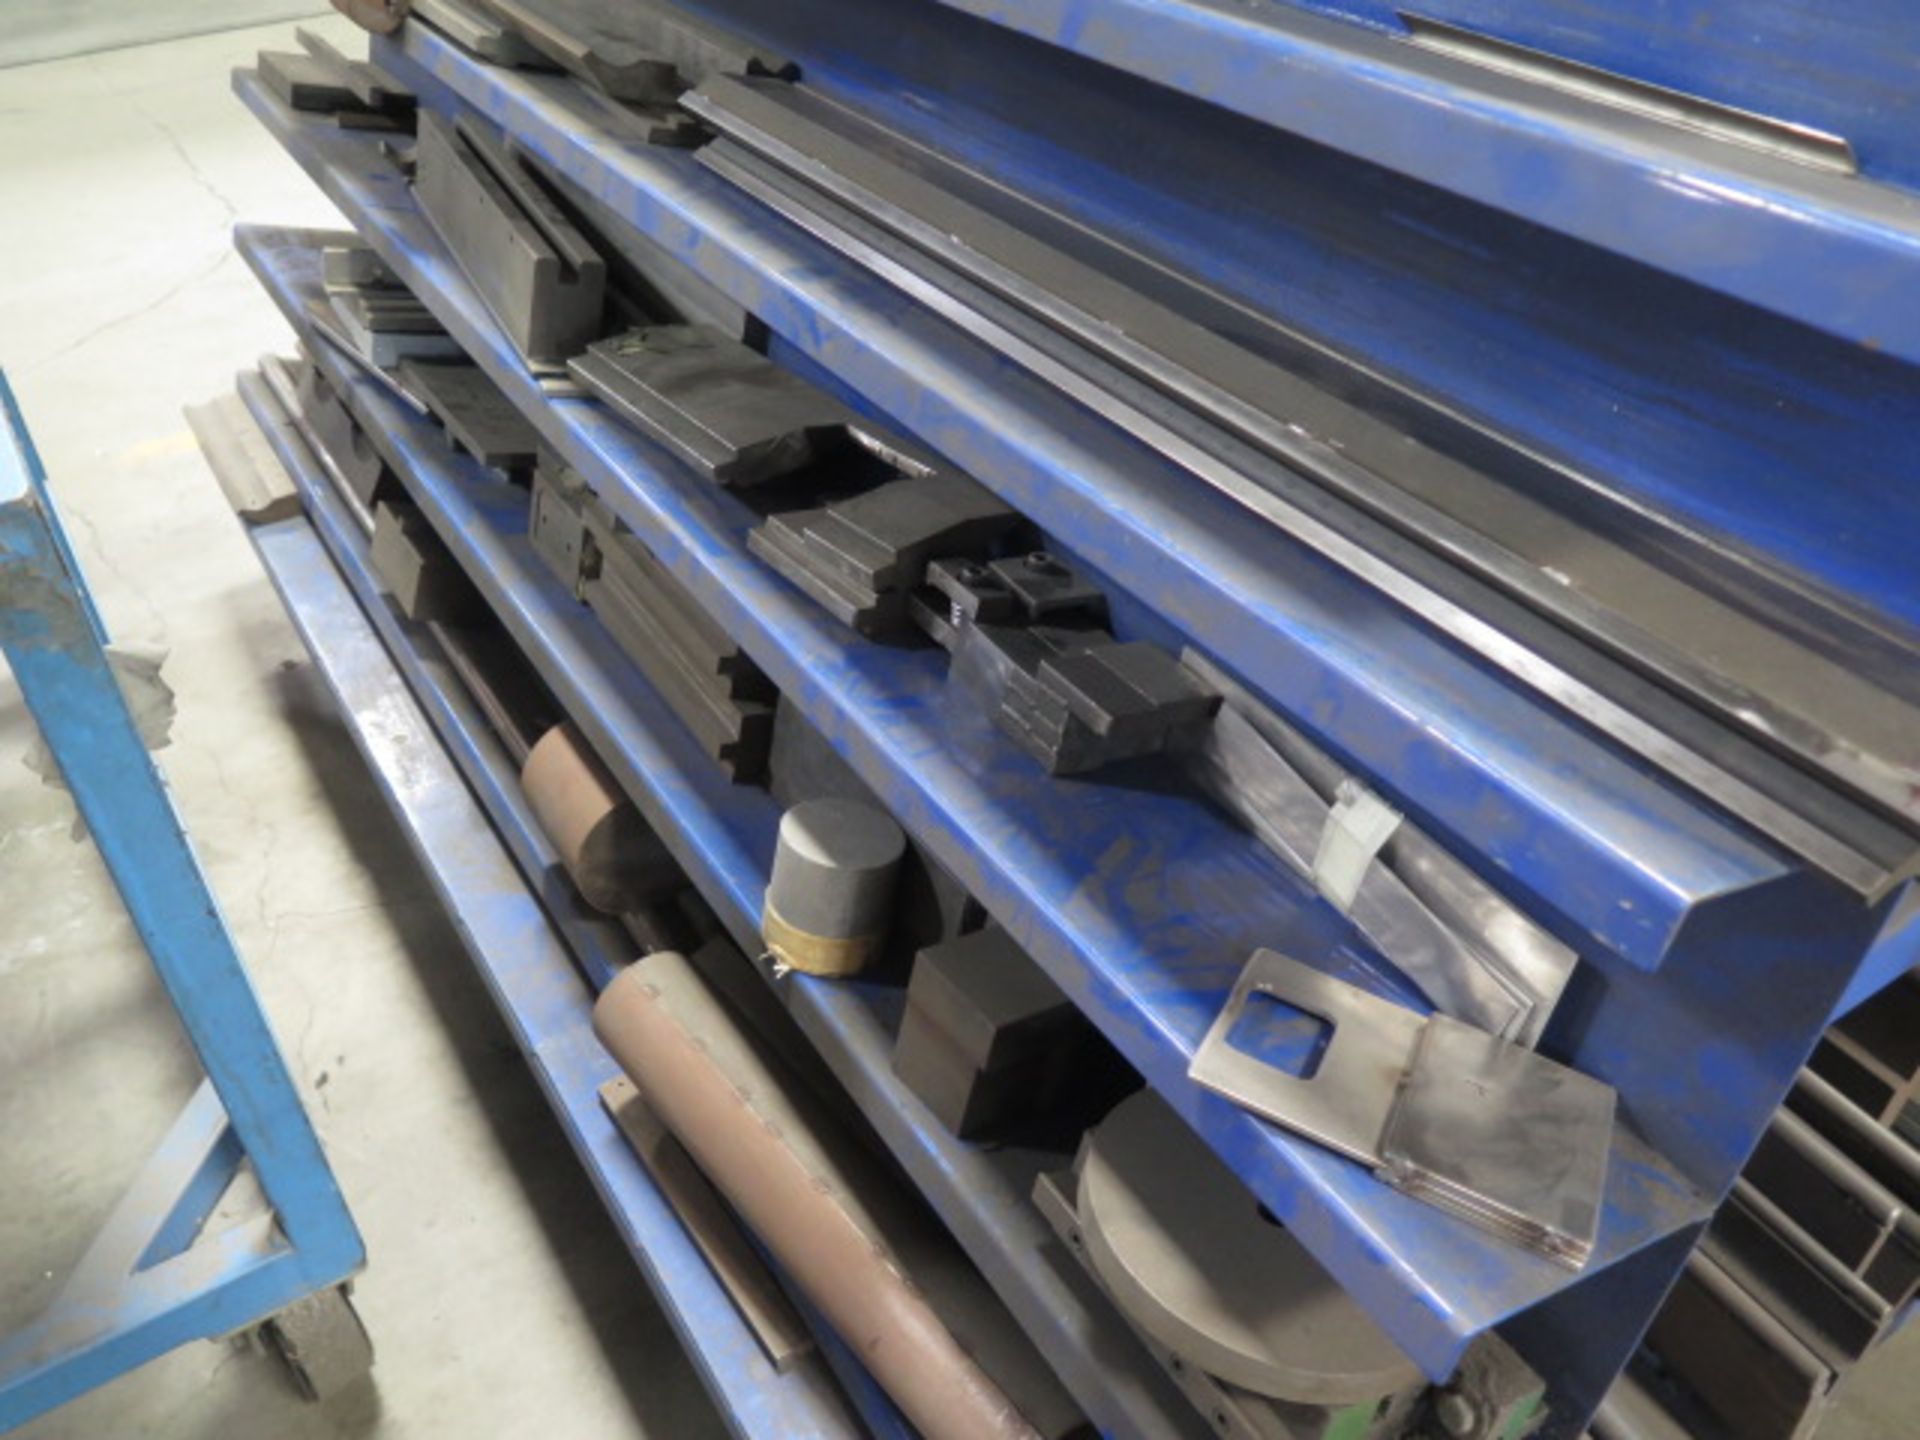 Press Brake Dies w/ Rolling "A" Frame Cart (SOLD AS-IS - NO WARRANTY) - Image 11 of 15